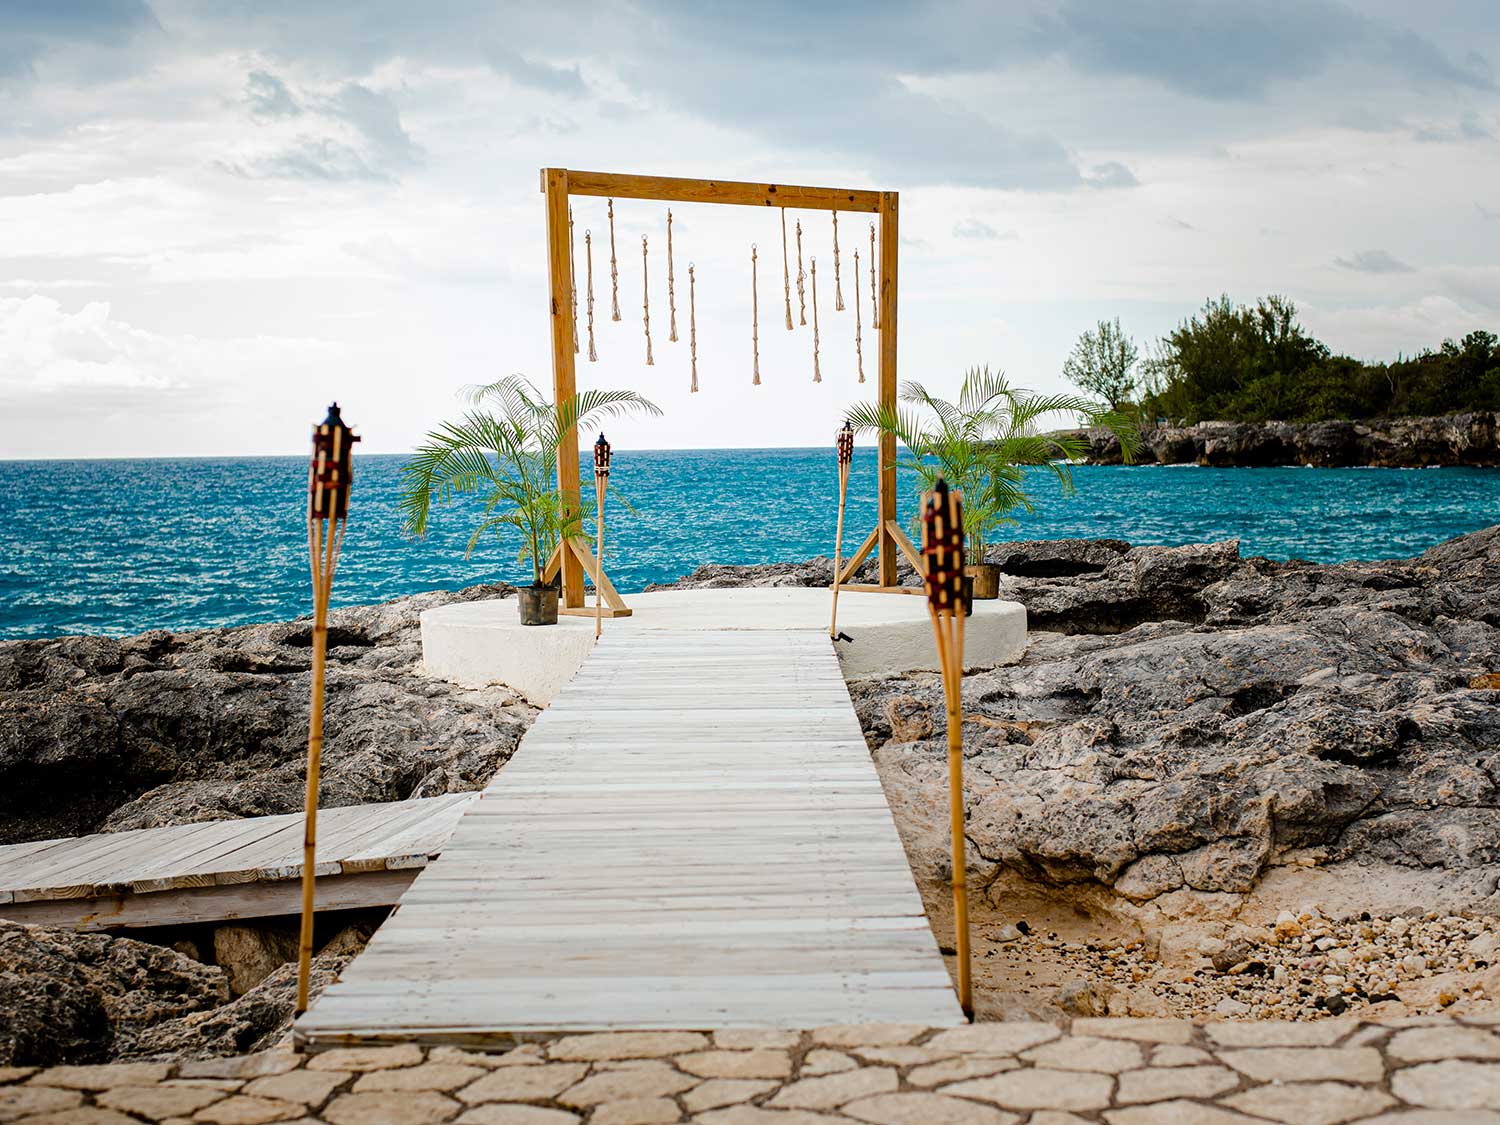 A very romantic proposal setting at the Cliff Hotel in Negril, Jamaica.